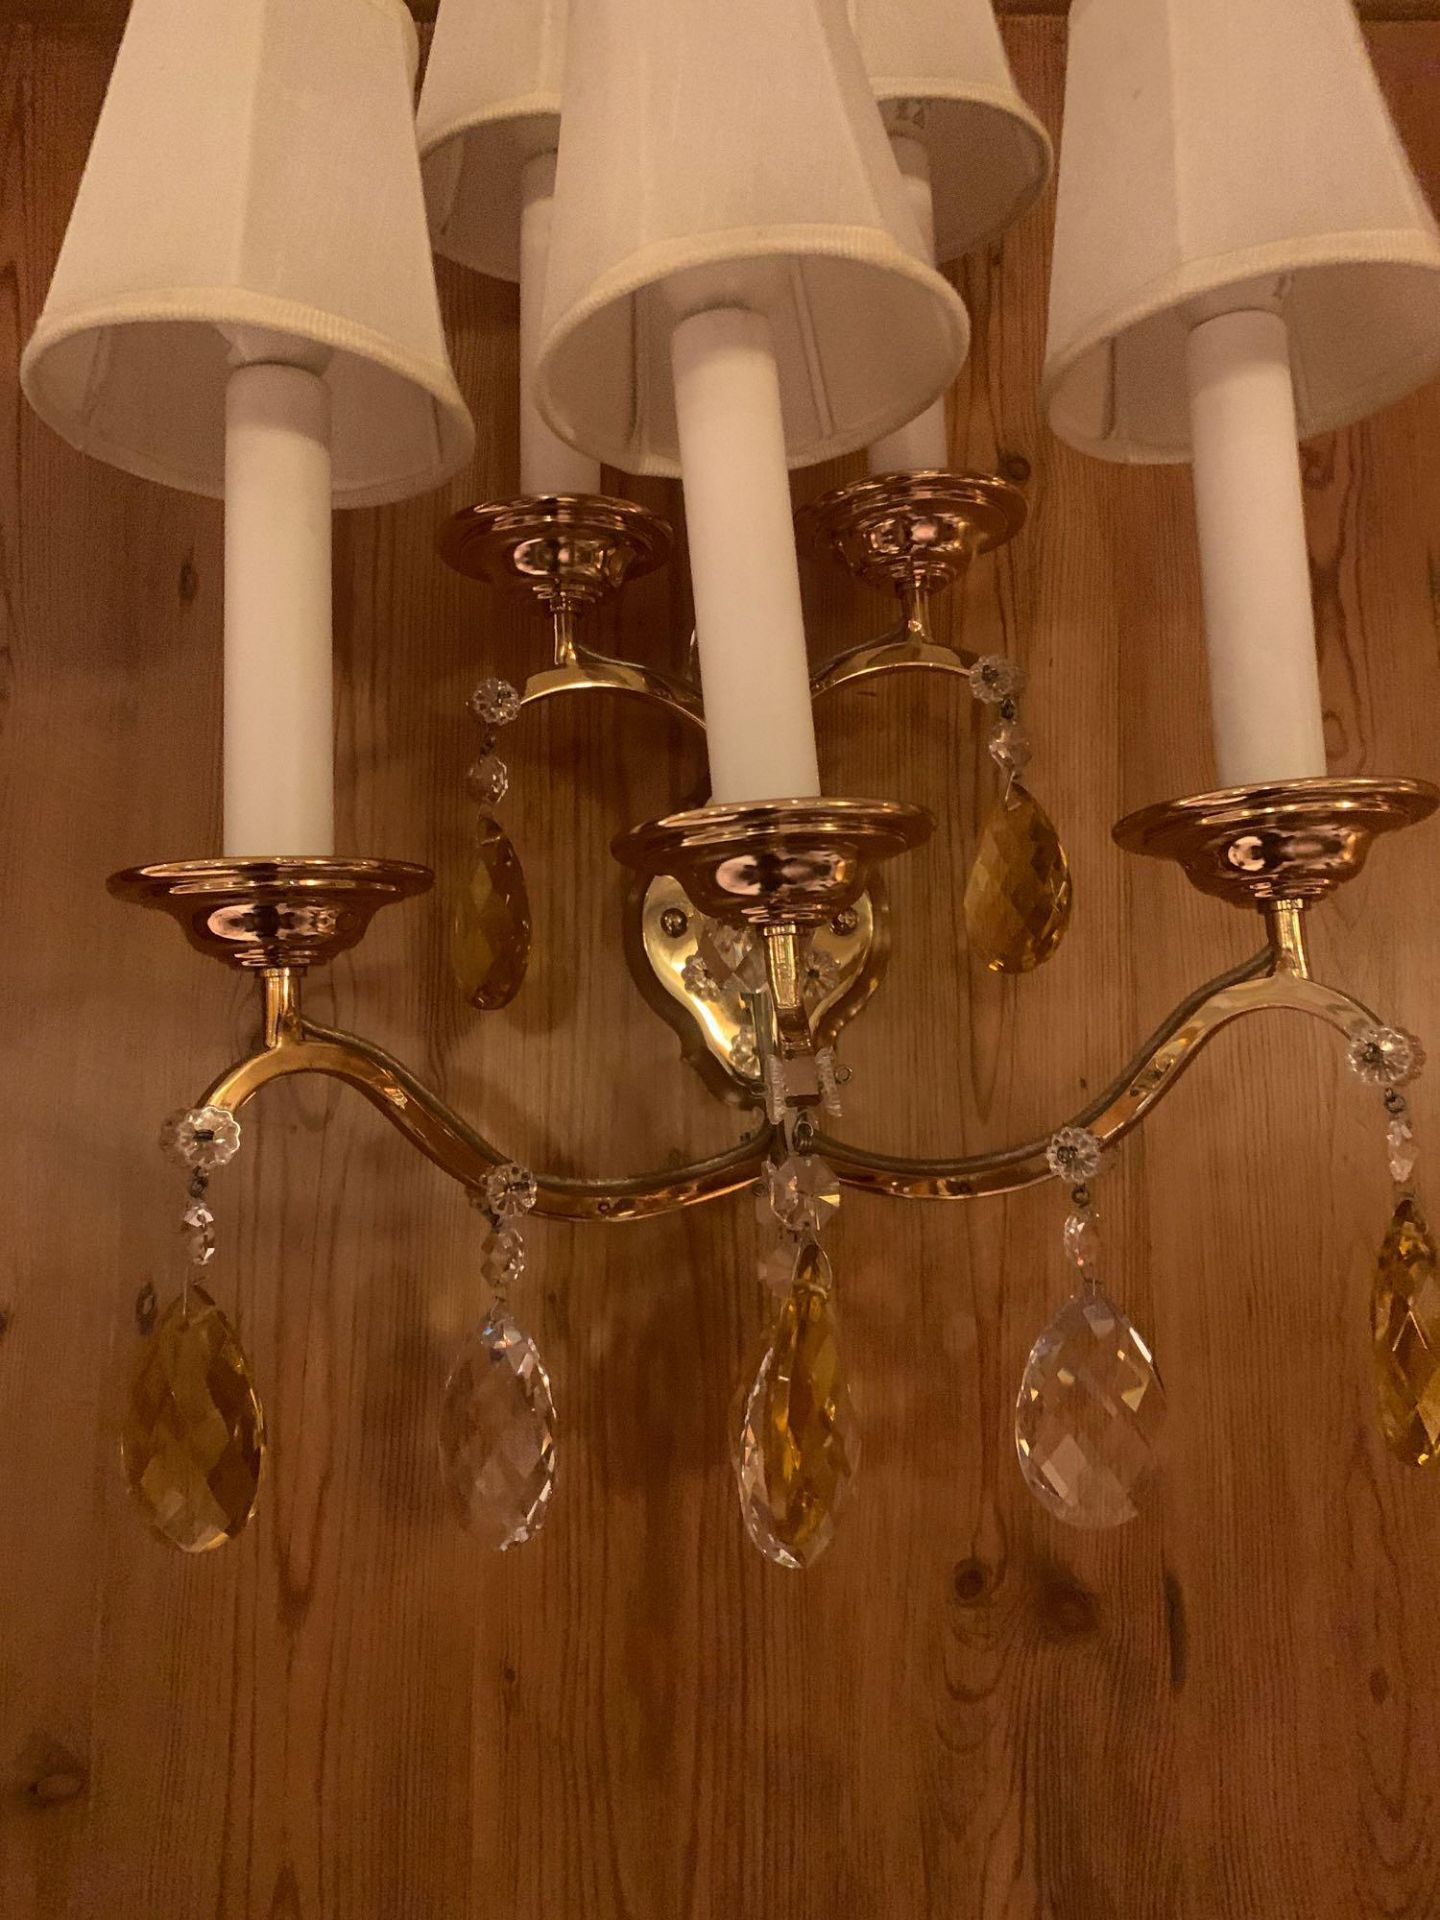 A Pair Of Five Arm Brass Wall Sconce With Linen Shades Droplets Amber And Clear Crystal Glass. 35x - Bild 3 aus 5